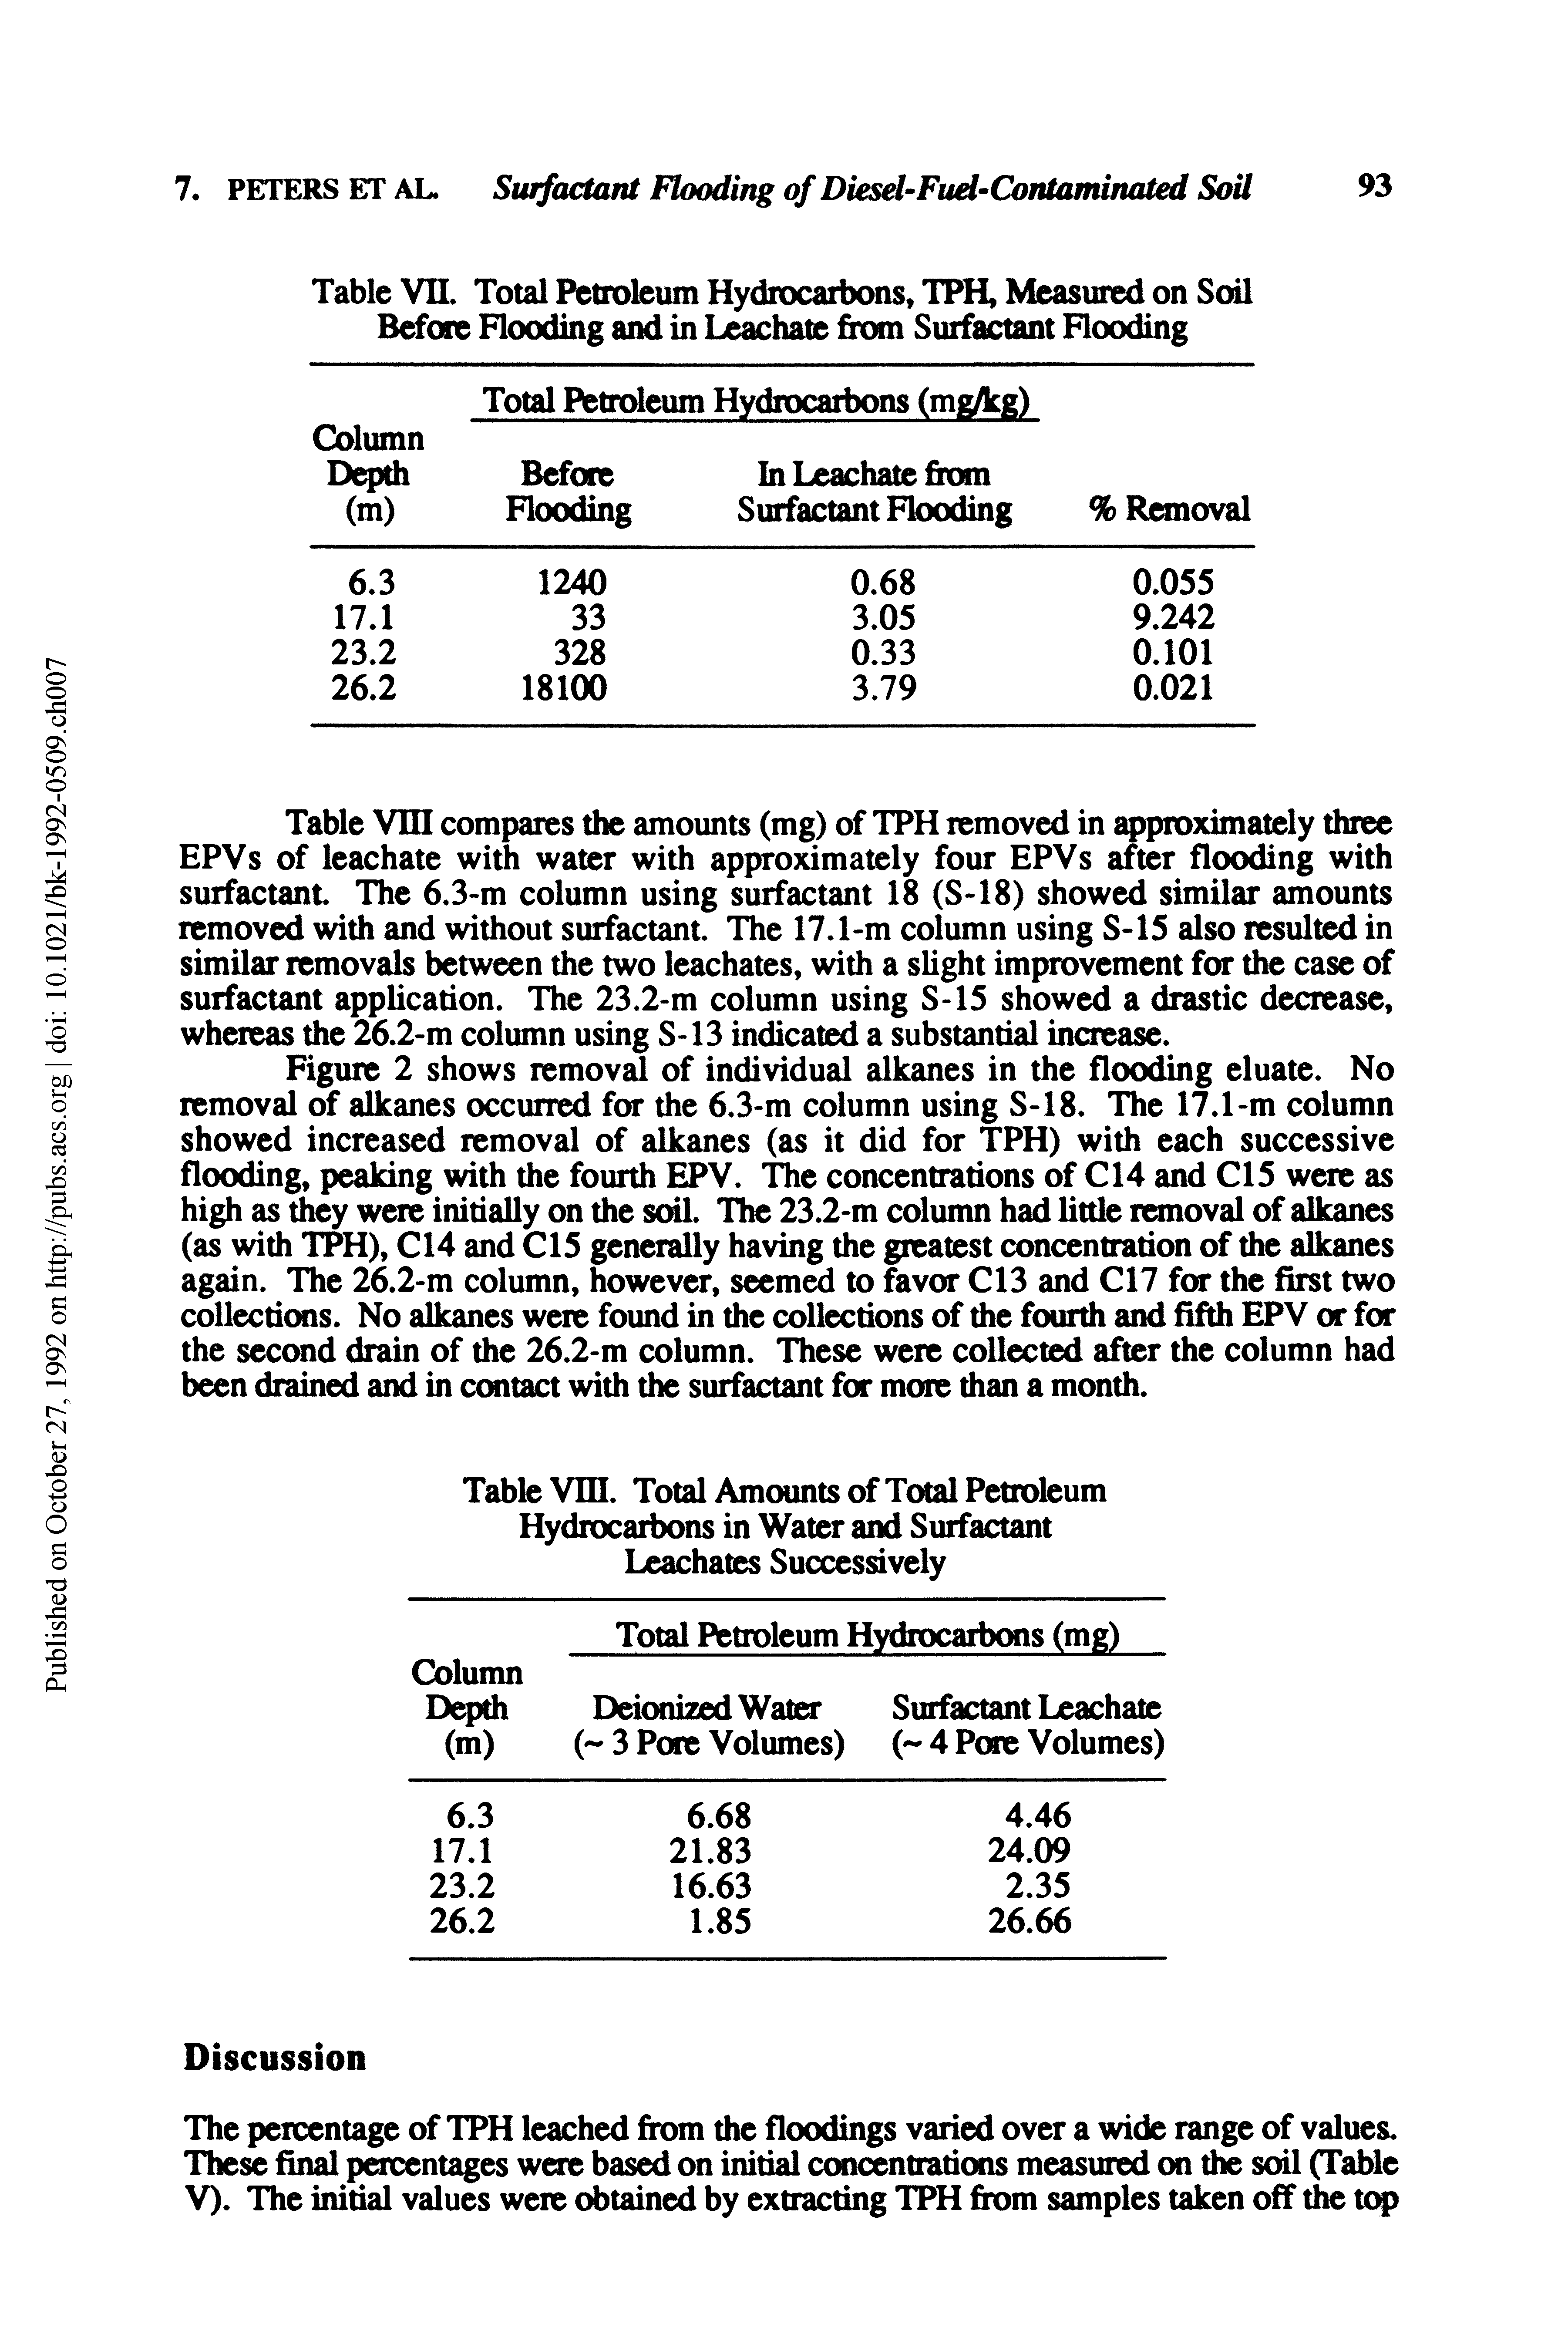 Table Vin compares the amounts (mg) of TPH remove in qipioximately three EPVs of leachate with water with approximately four EPVs after flooding with surfactant The 6.3-m column using surfactant 18 (S-18) showed similar amounts removed with and without surfactant The 17.1-m column using S-15 also resulted in similar removals between the two leachates, with a slight improvement for the case of surfactant application. The 23.2-m column using S45 showed a drastic decrease, whereas the 26.2-m column using S43 indicated a substantial increase.